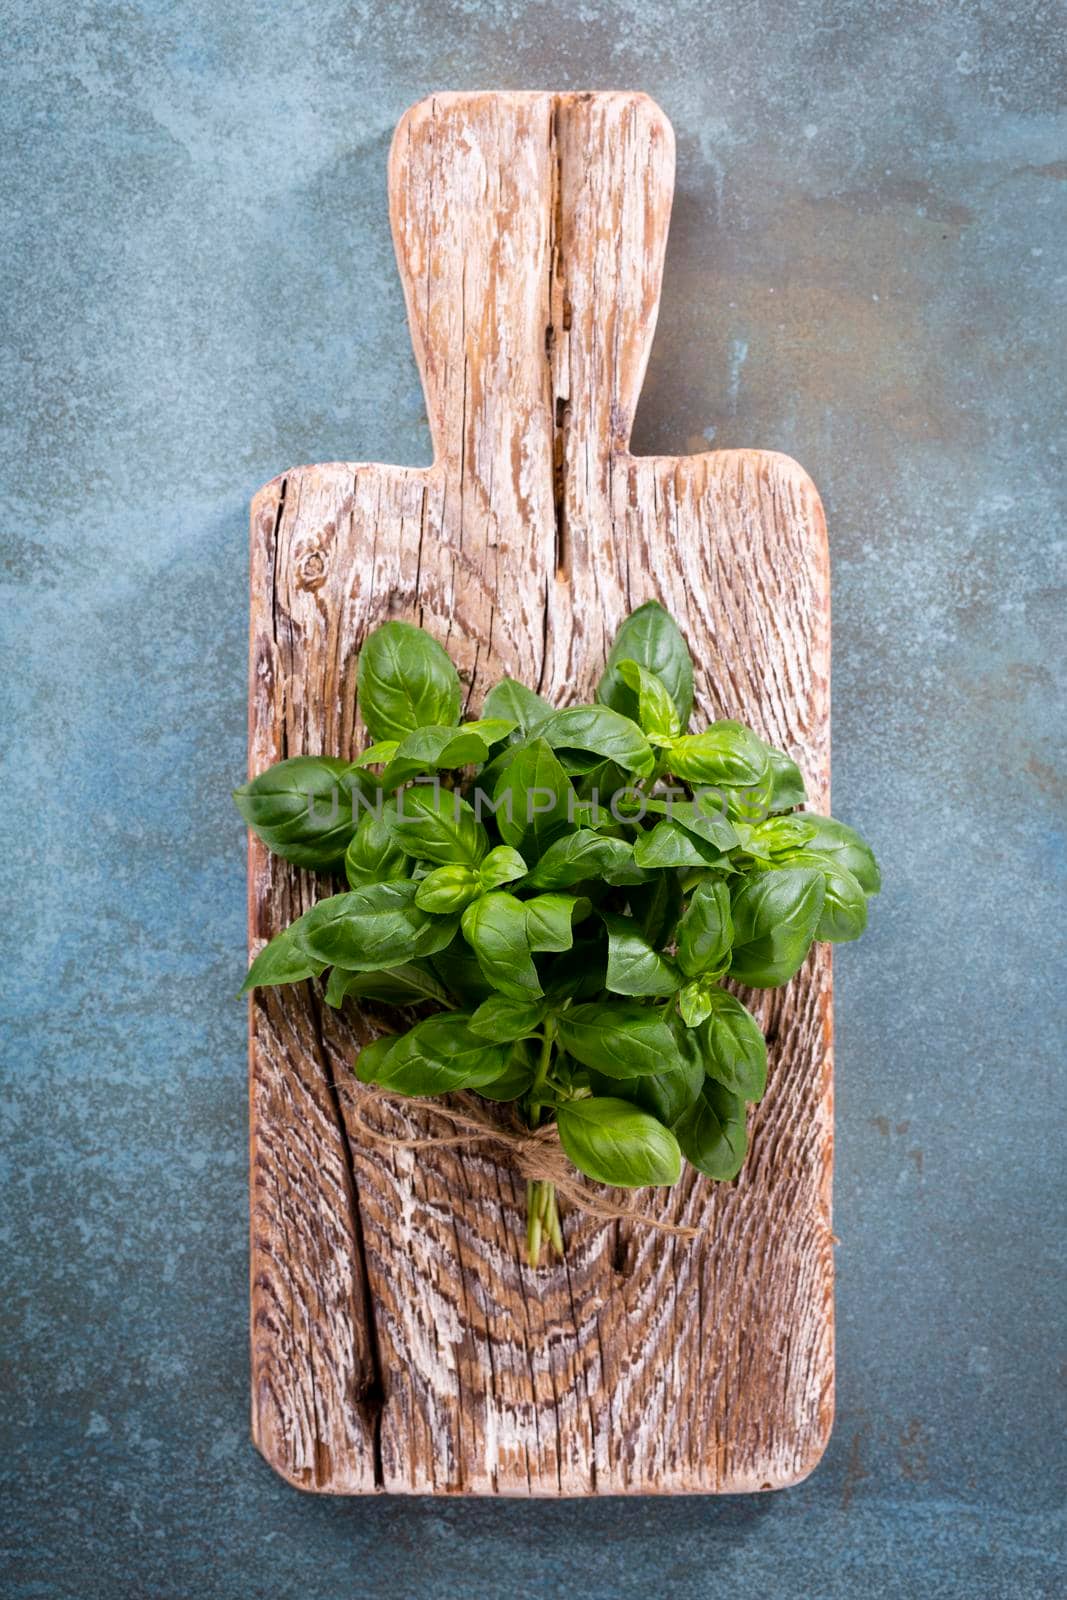 Bunch of fresh organic basil in cutting board on rustic wooden background by gitusik